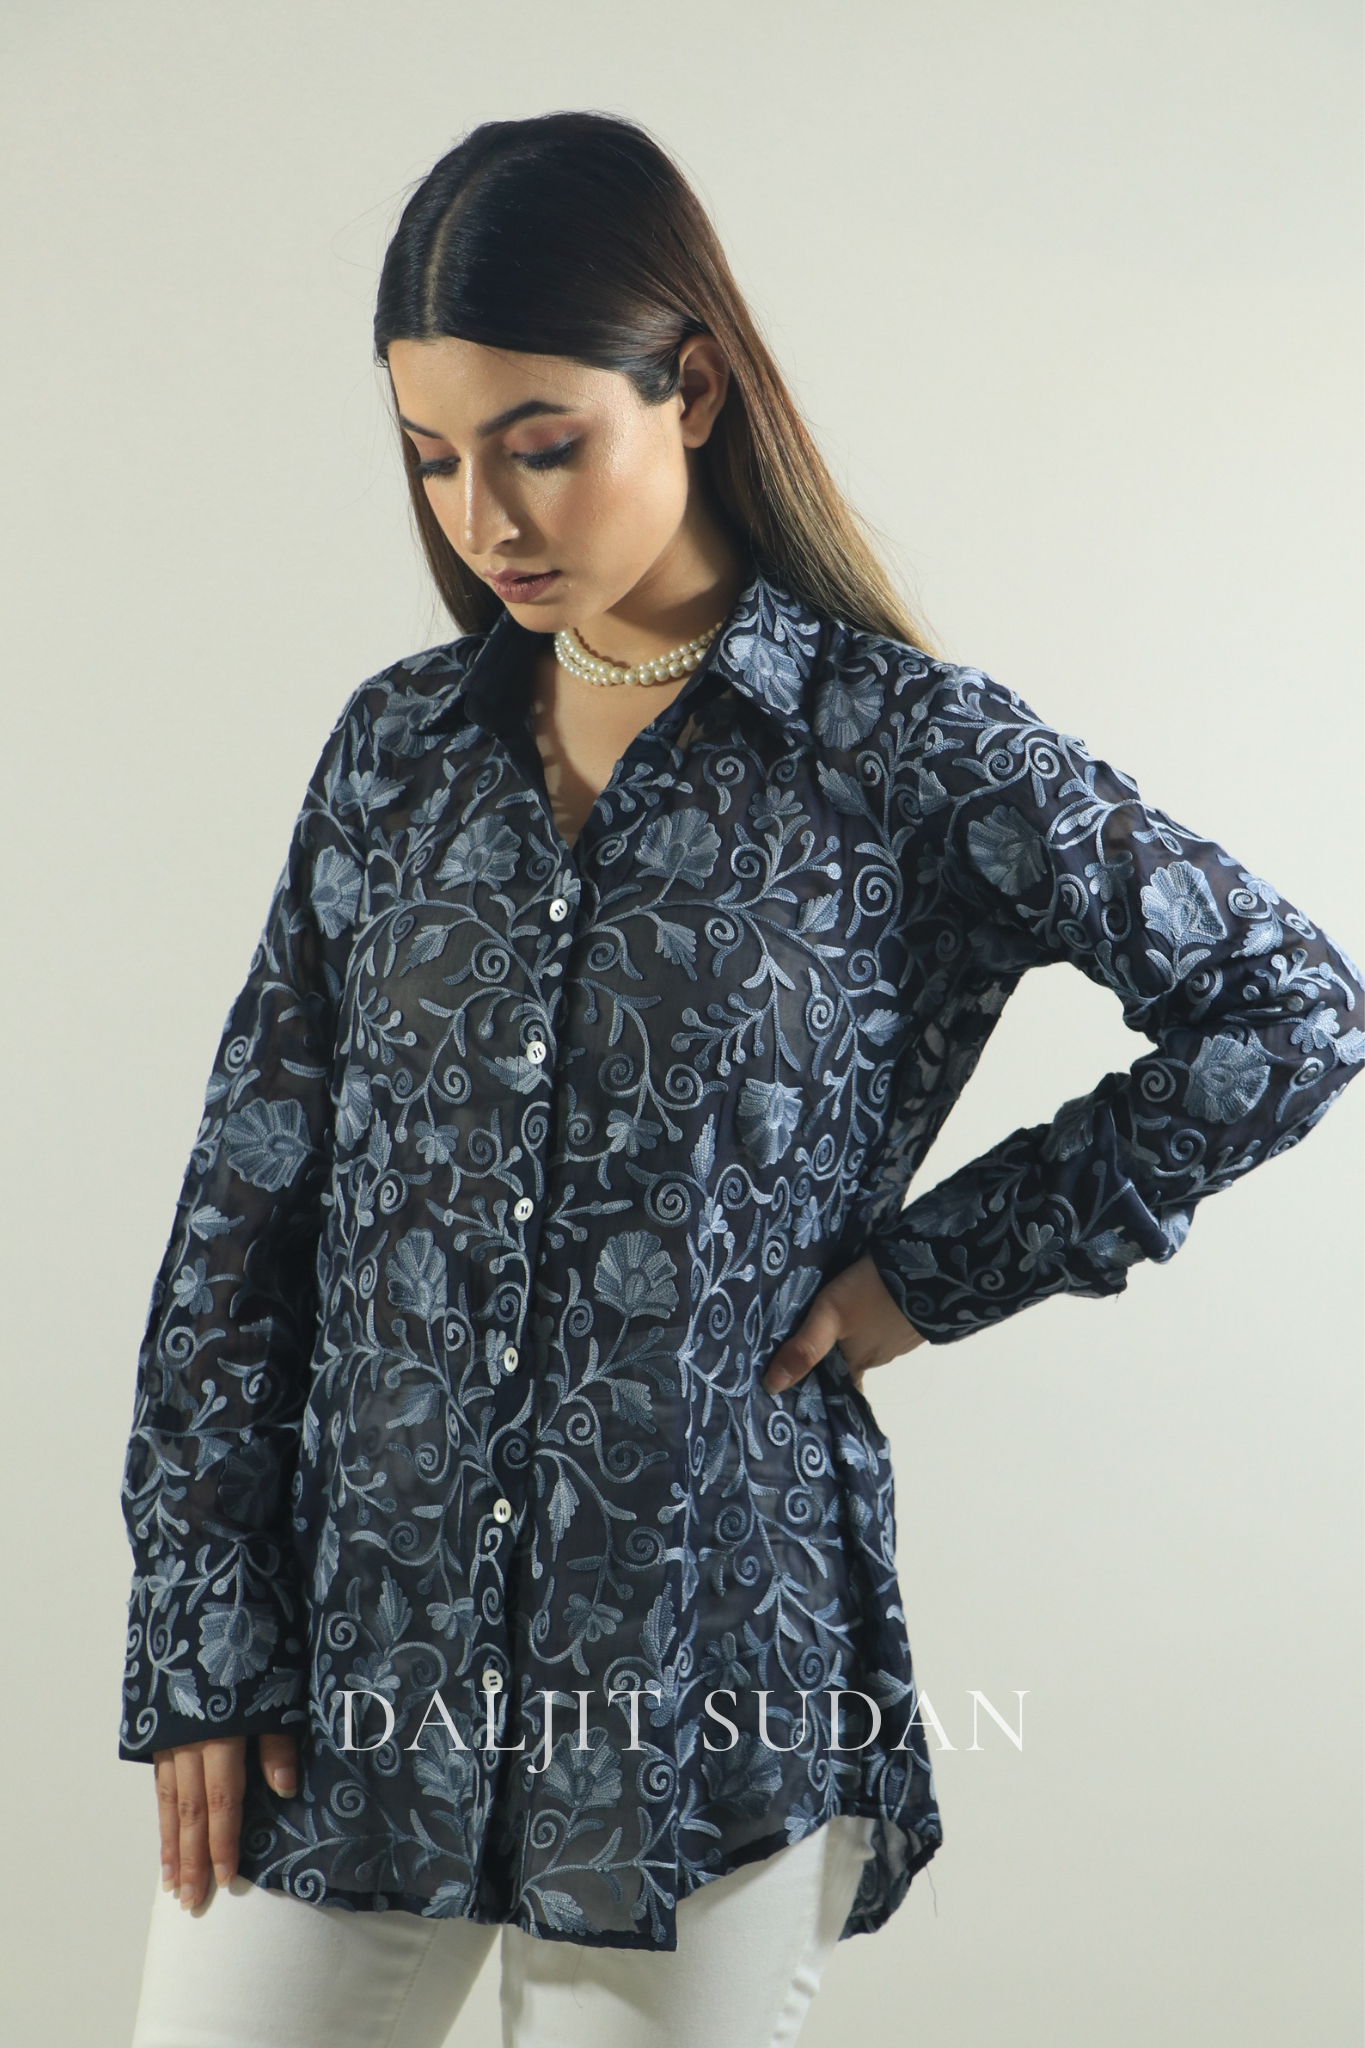 Black all over embroidered shirt